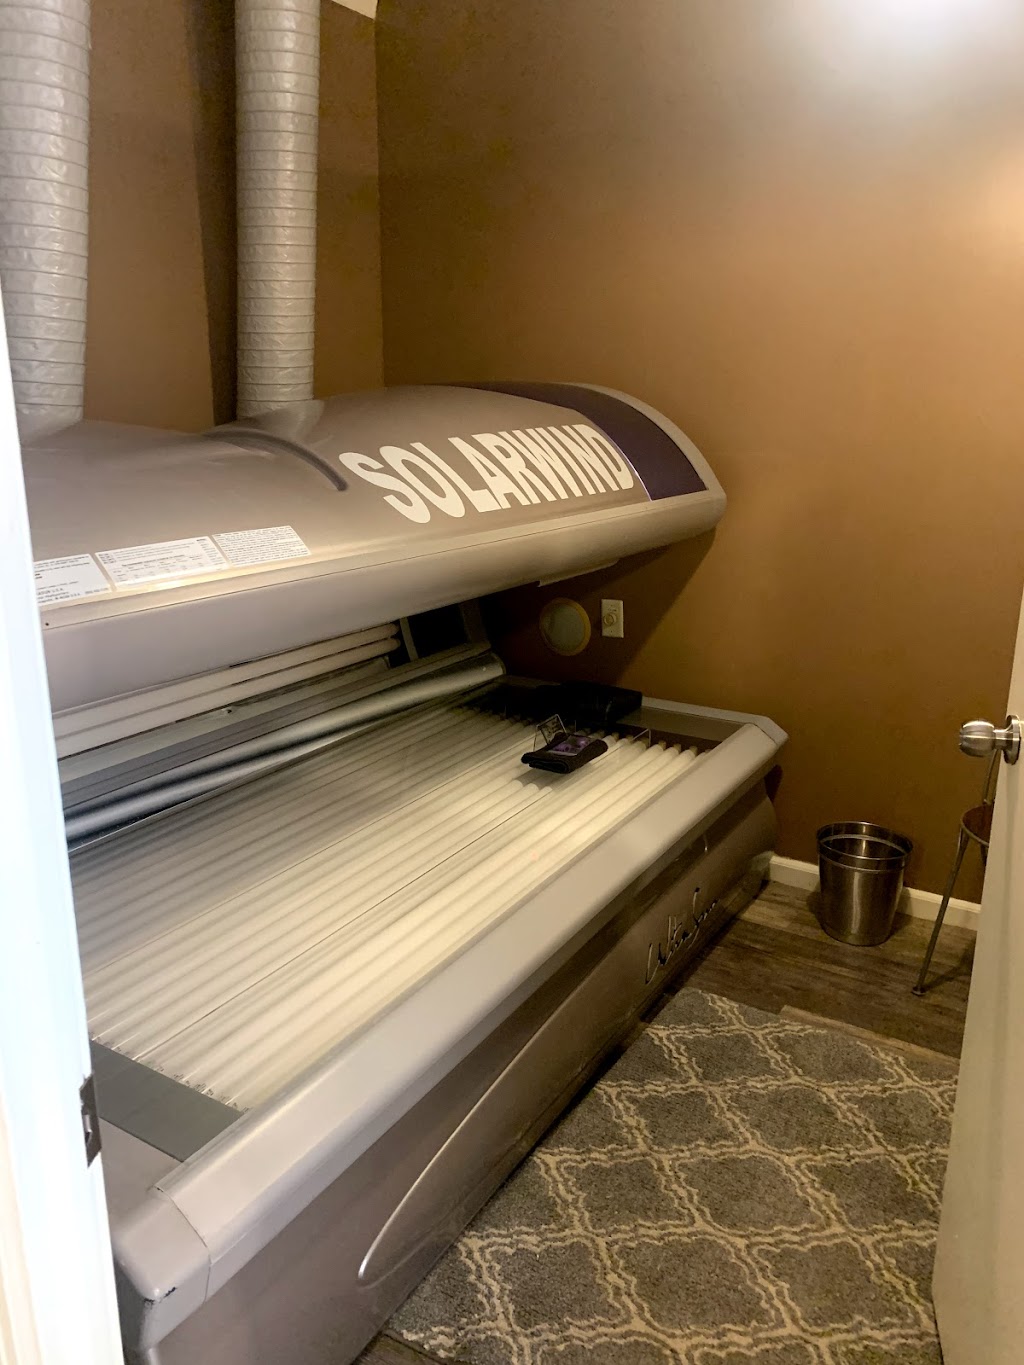 European Image Tanning & Sunless Centers | 380 Willis Ave, Roslyn Heights, NY 11577 | Phone: (516) 484-1130